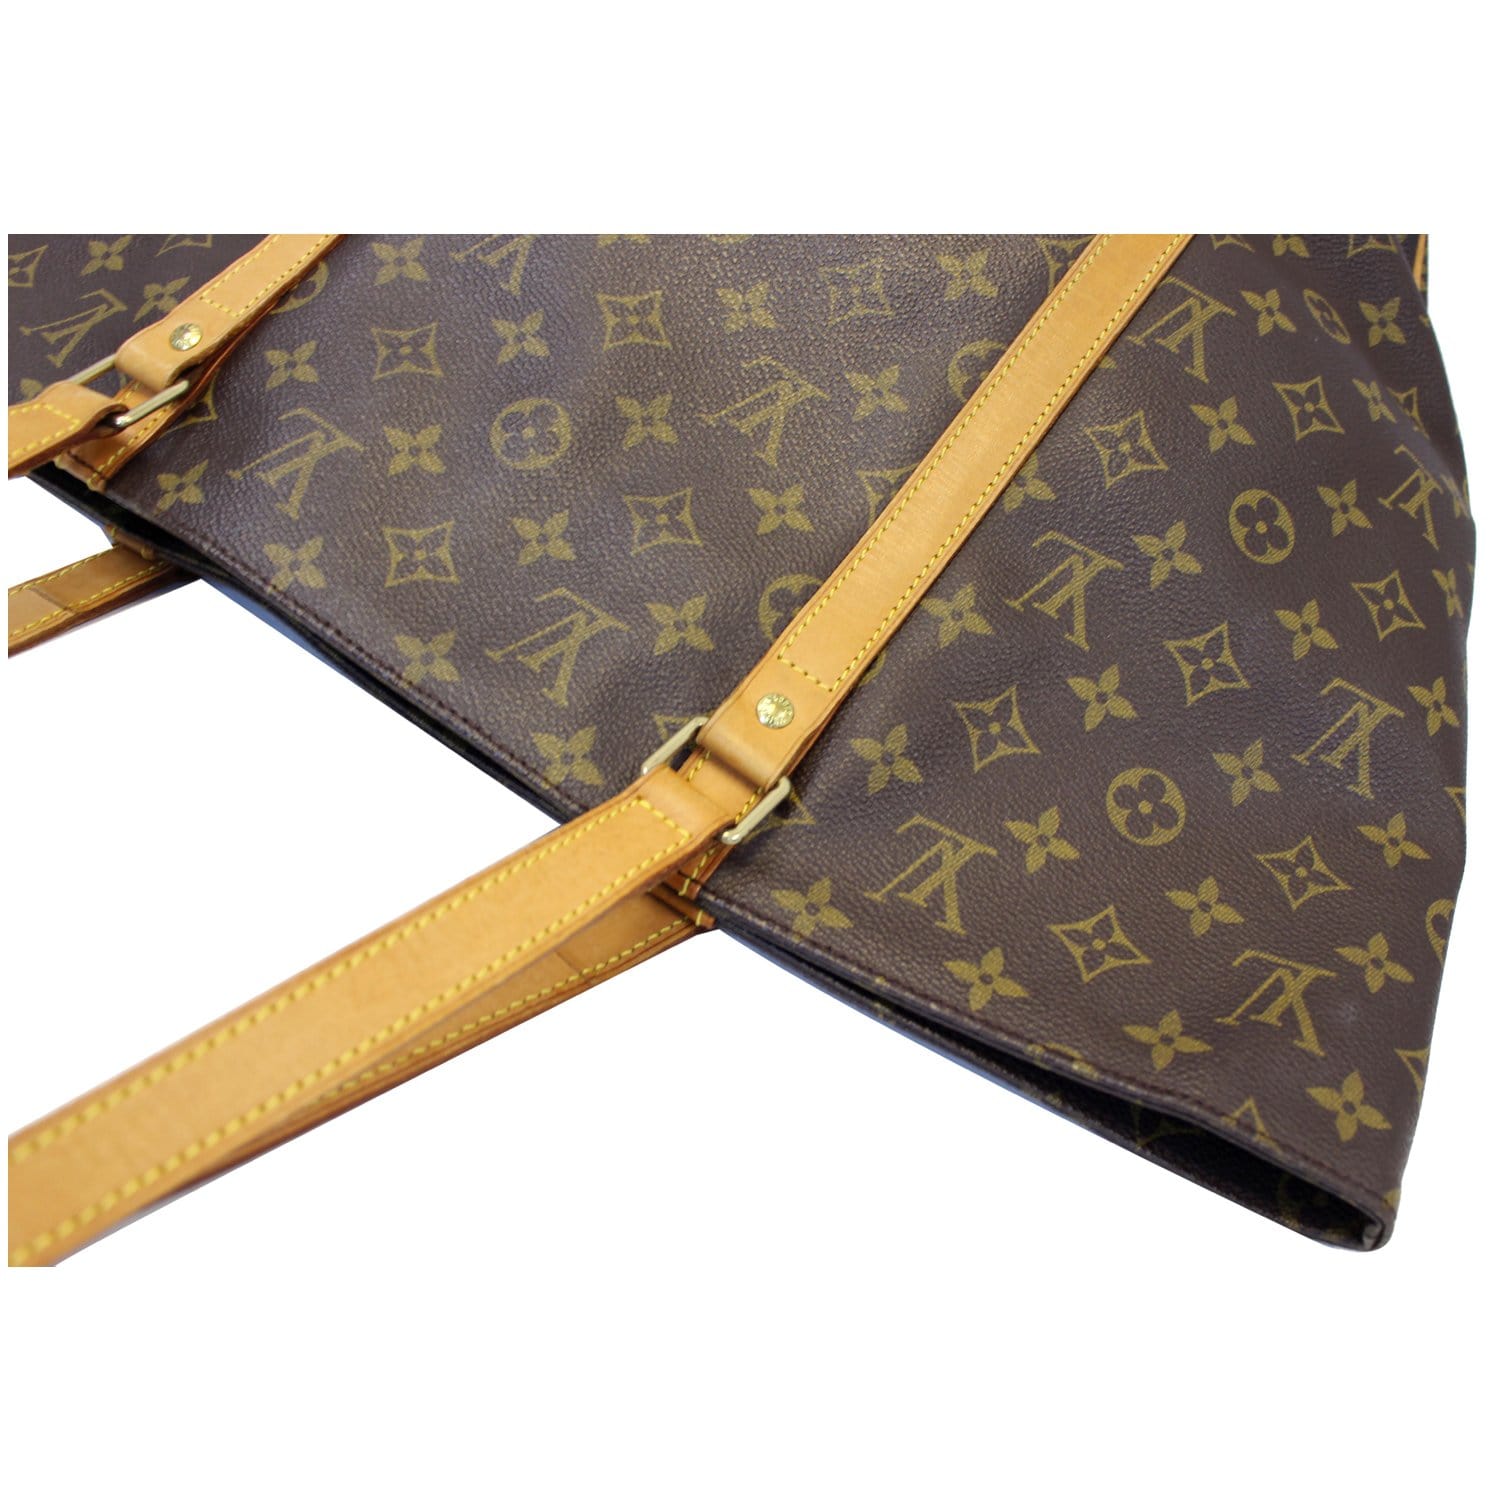 Louis Vuitton Monogram Sac Shopping Leather Fabric Brown Tote bag Authentic